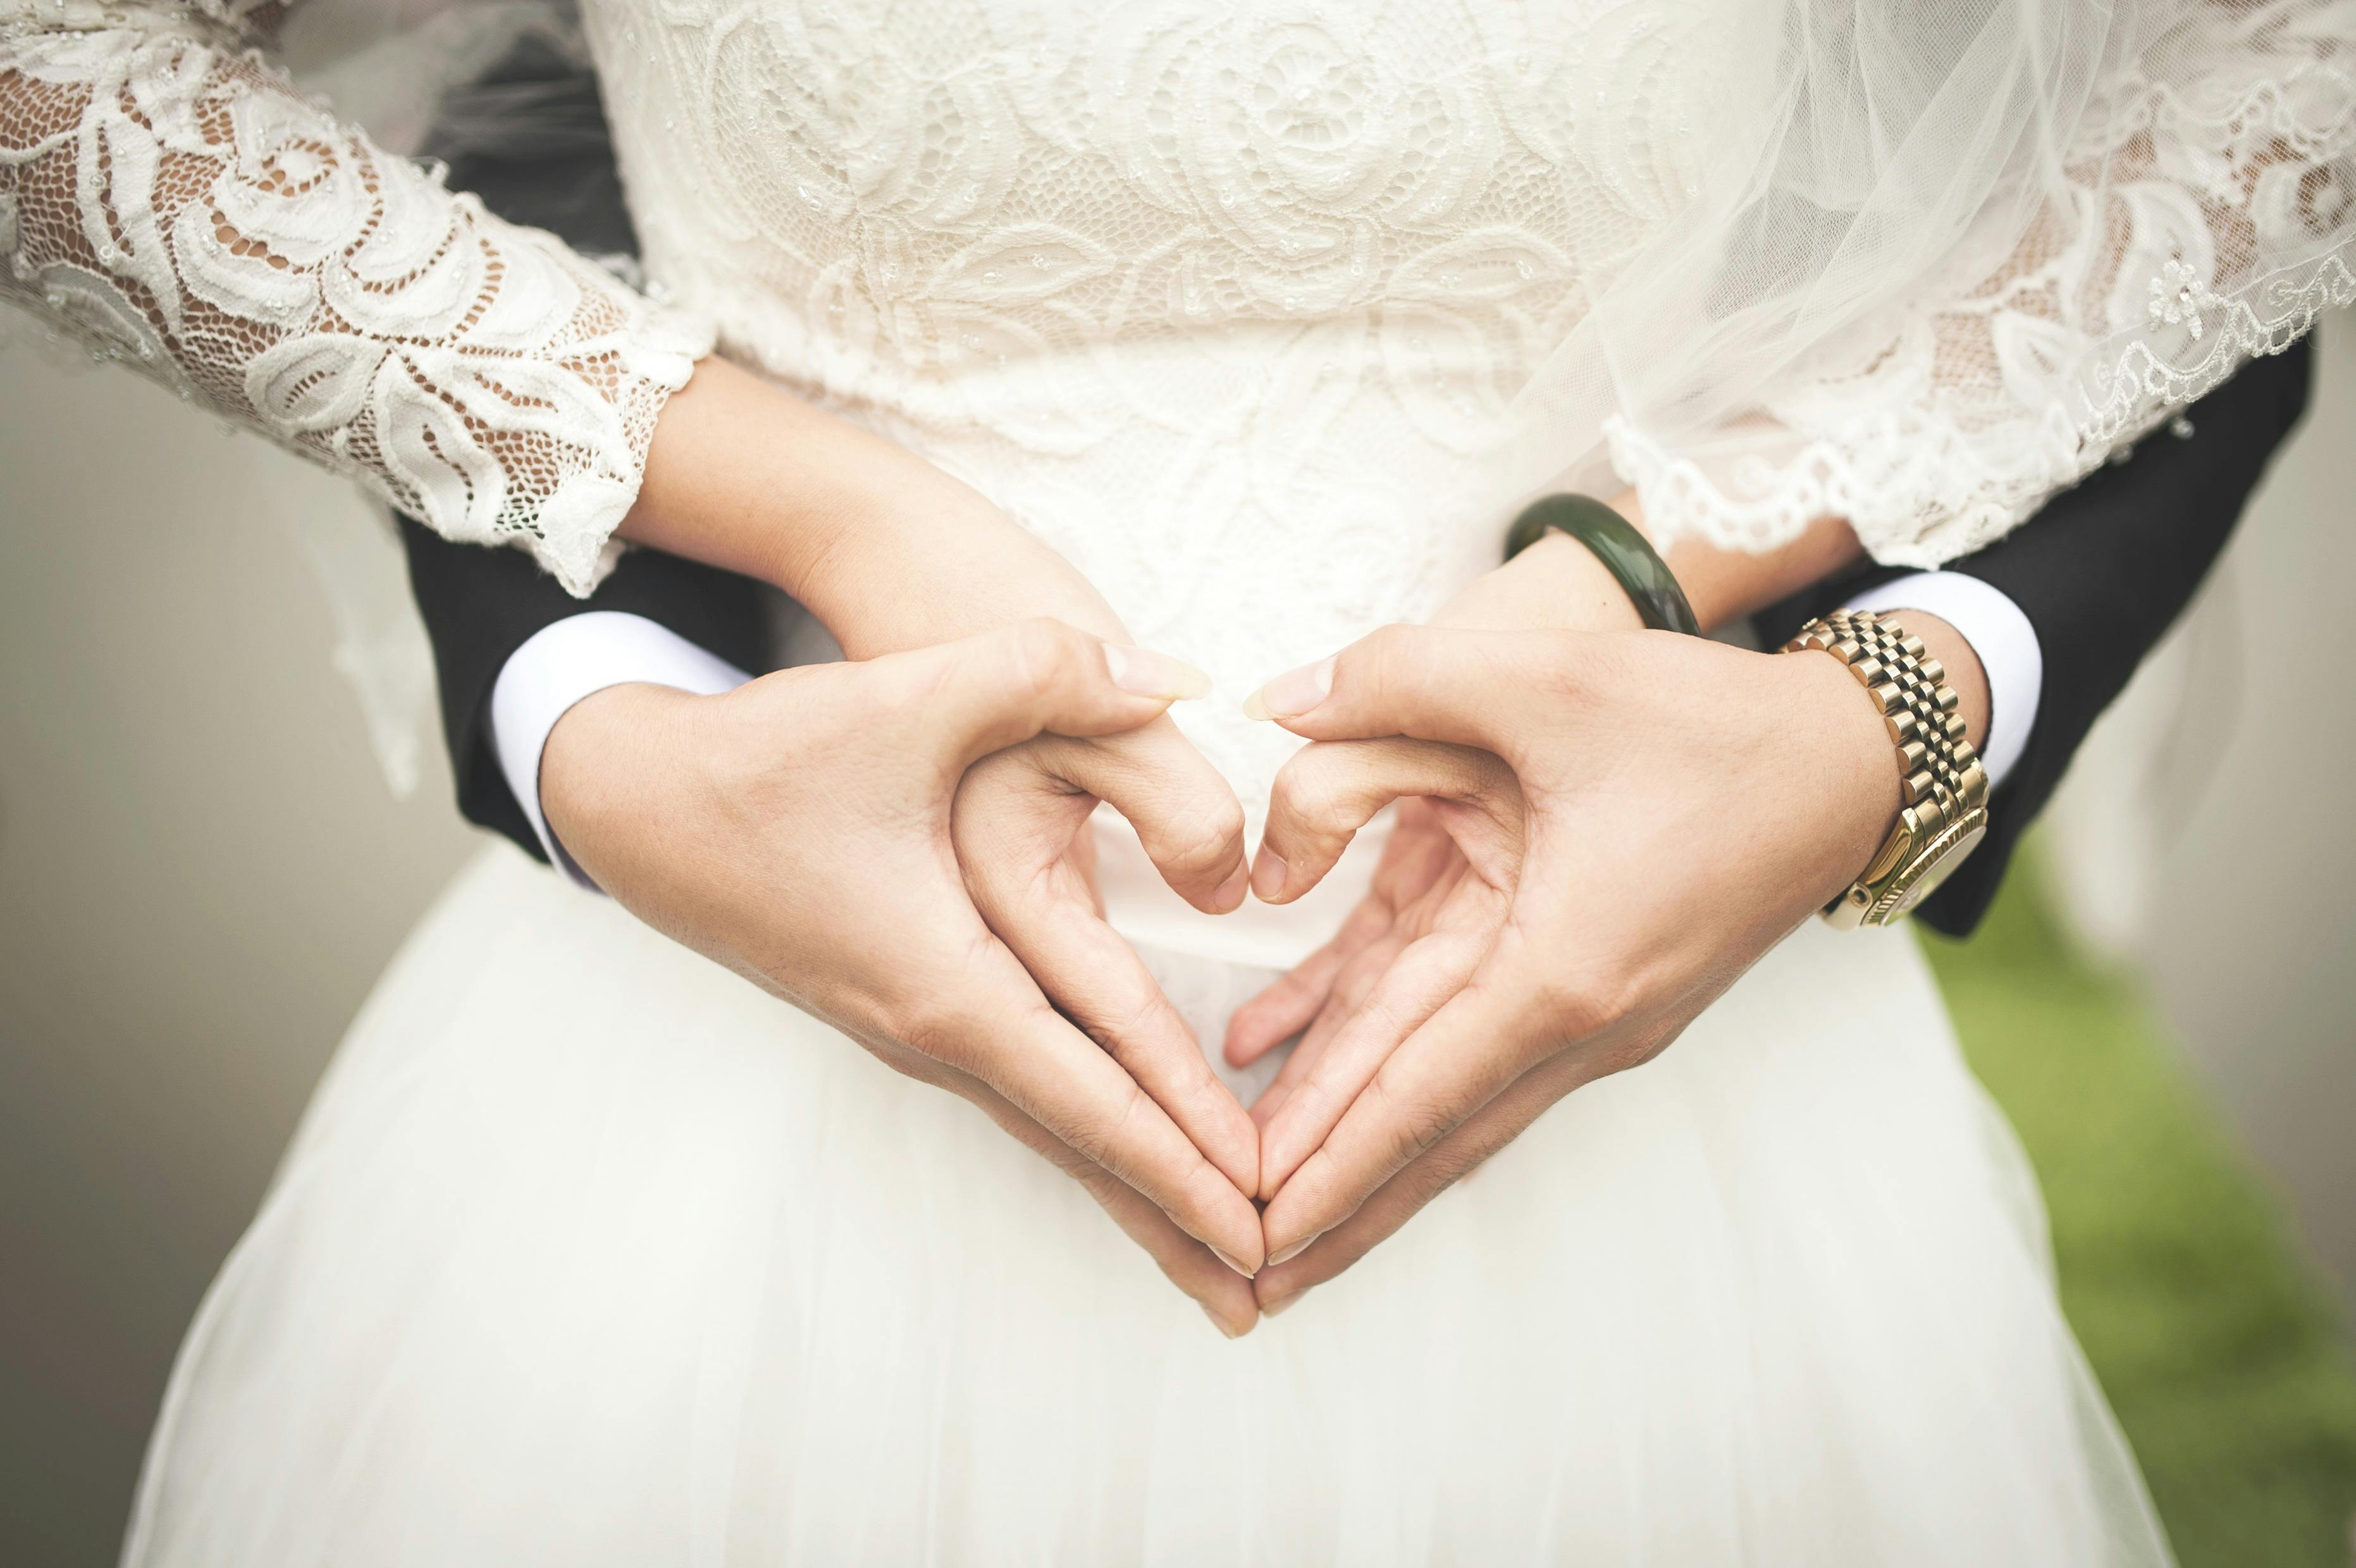 Newly wedded couple making heart shape with hands | Photo: Pexels